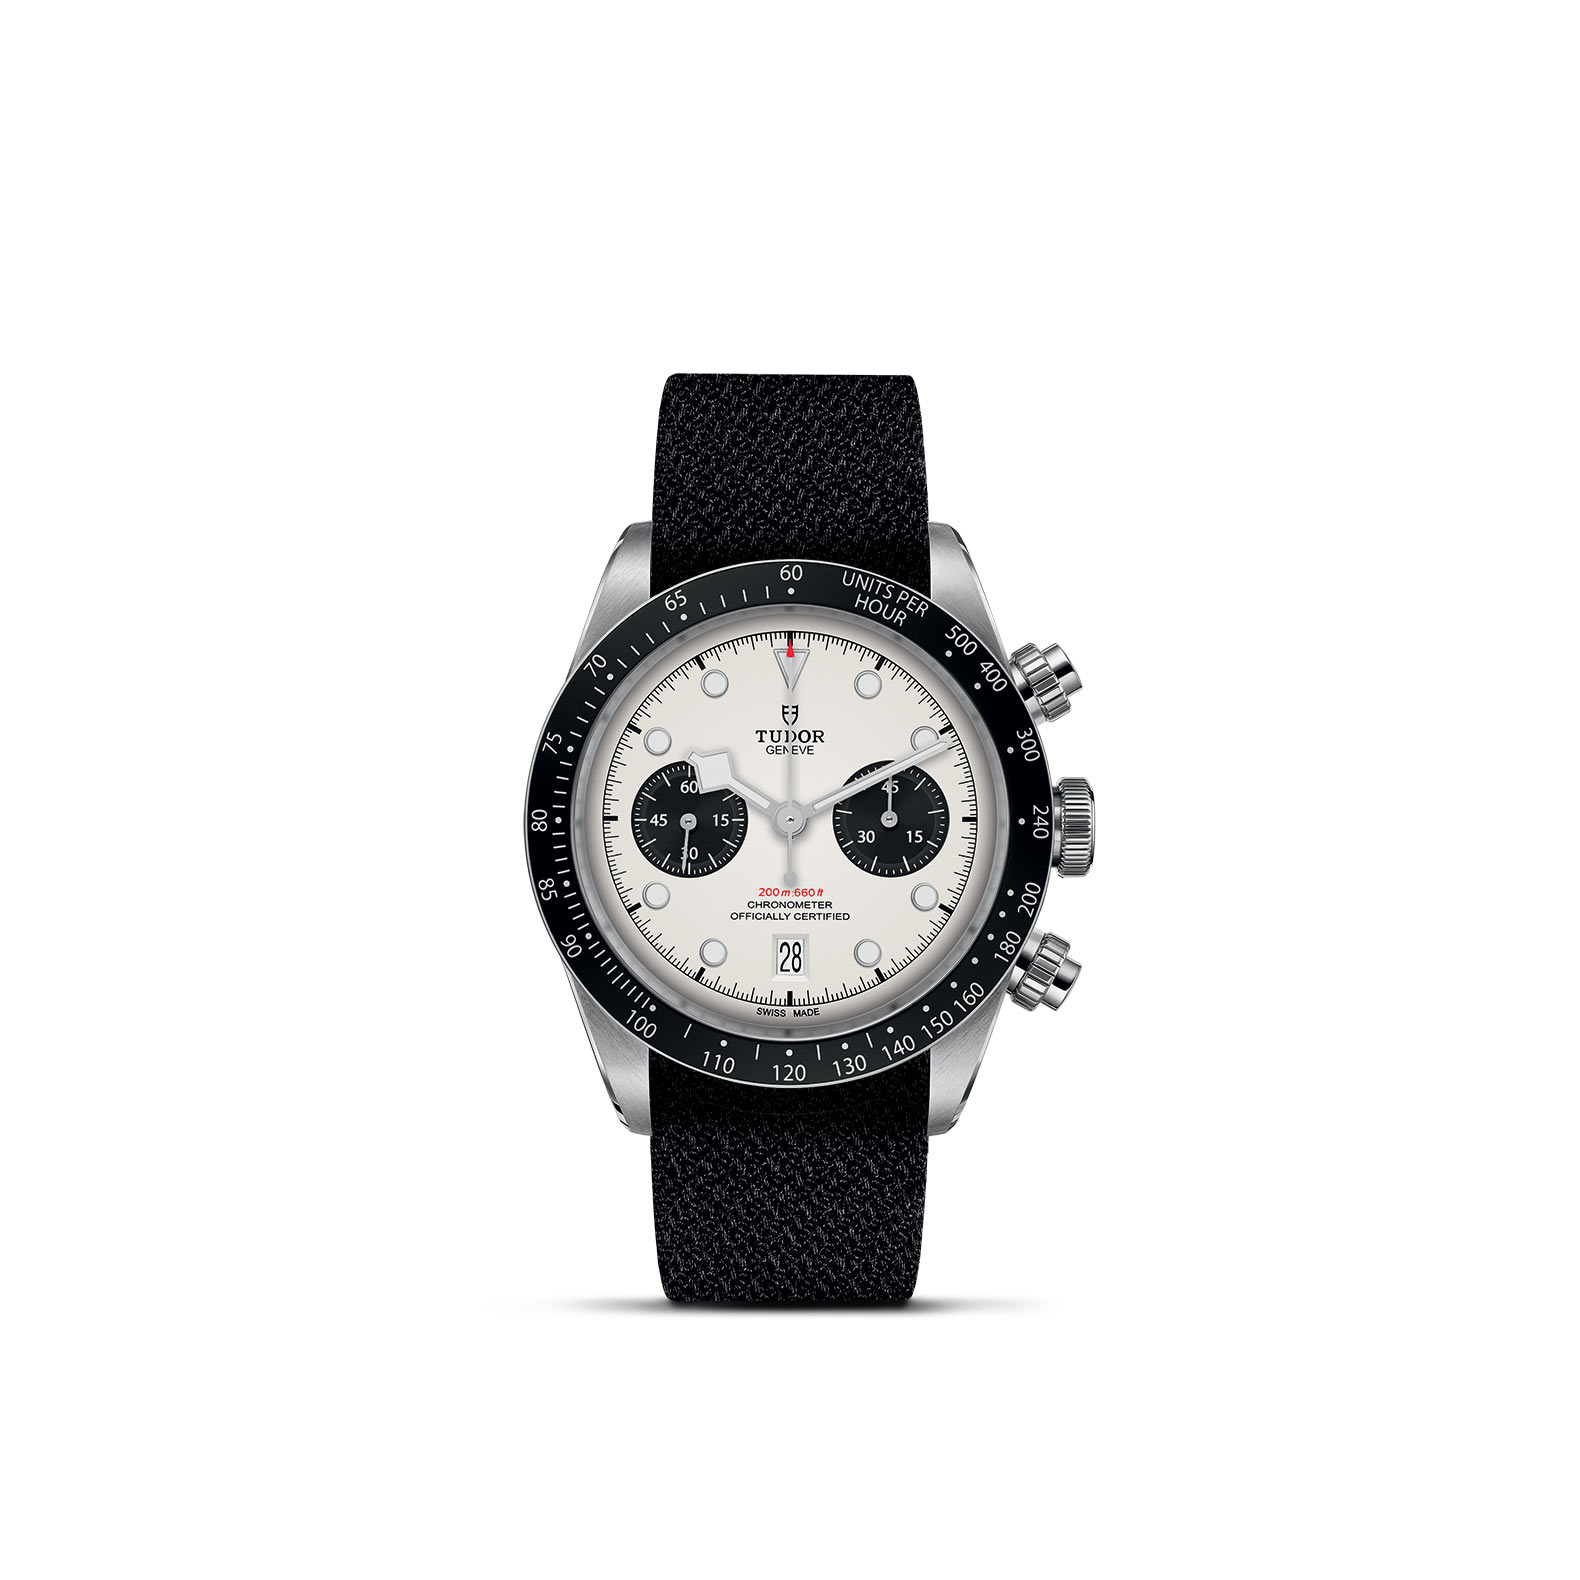 TUDOR BLACK BAY CHRONO standing upright, highlighting its classic design against a white background.